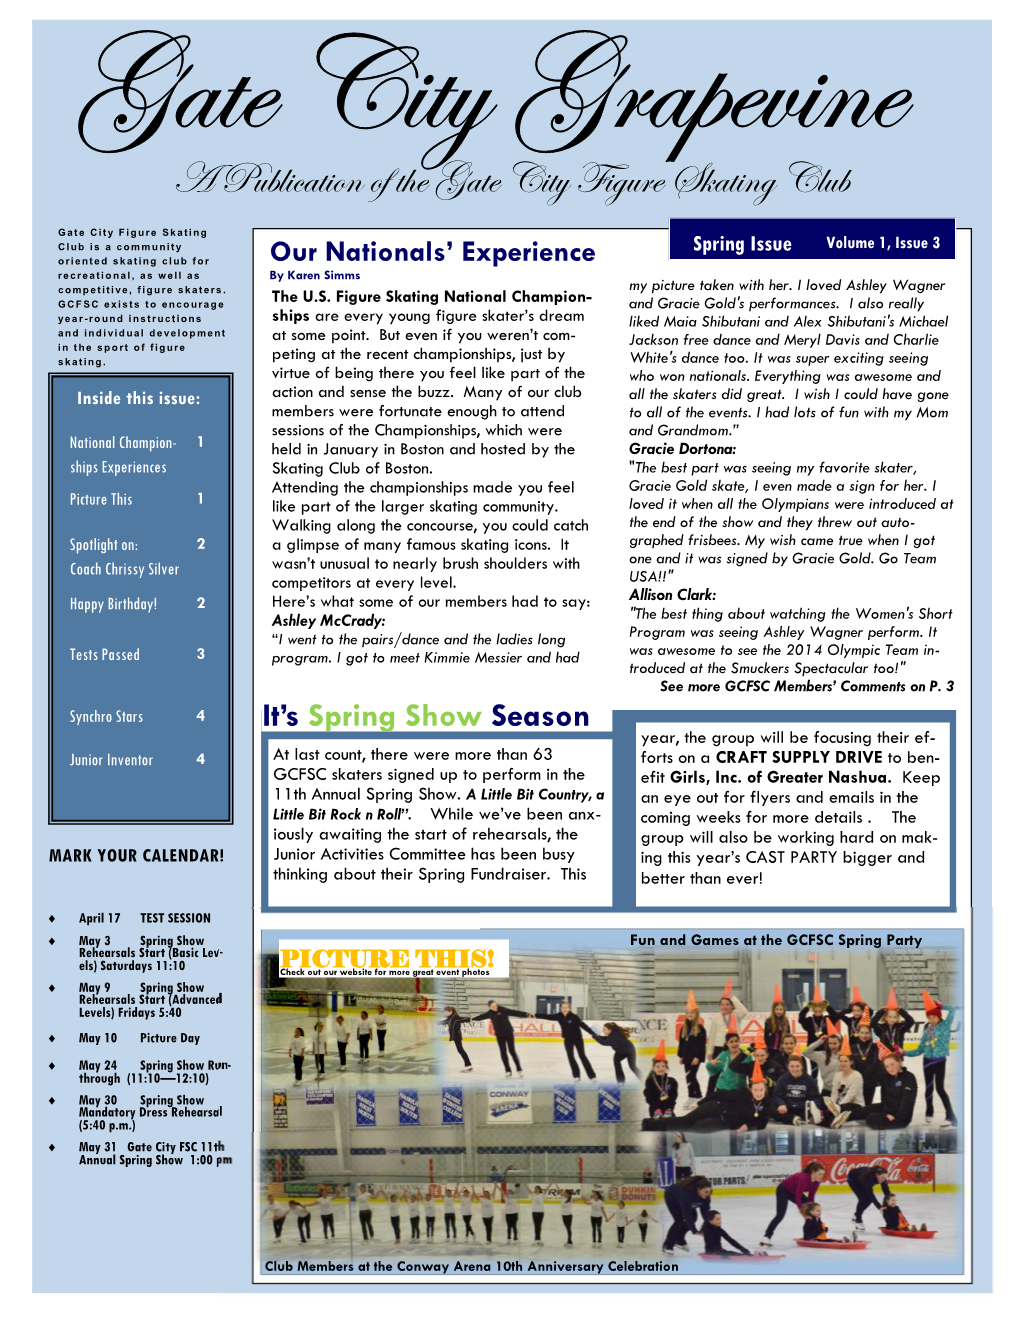 A Publication of the Gate City Figure Skating Club